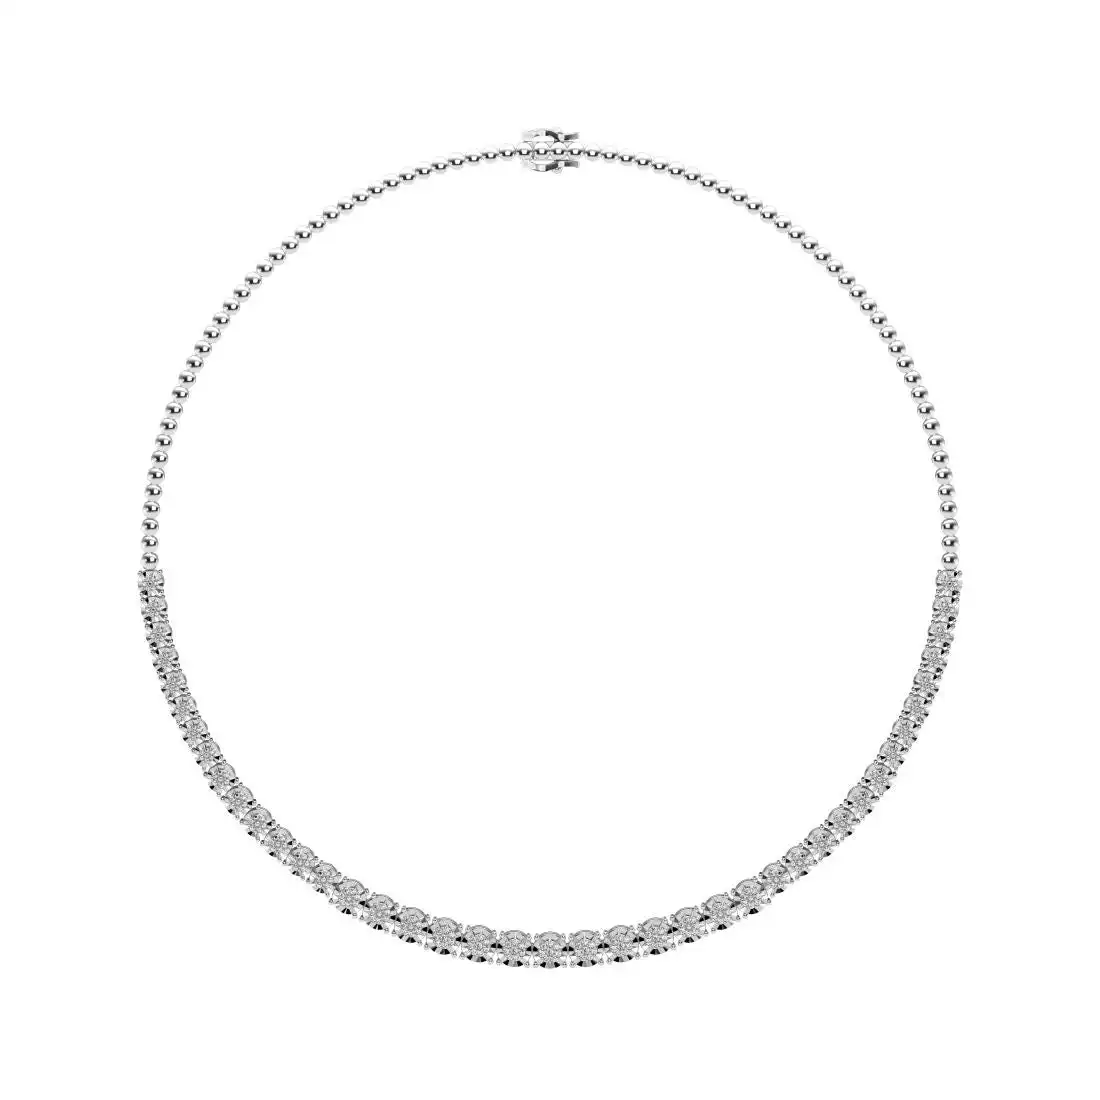 Mirage Tennis Necklace with 1.00ct of Laboratory Grown Diamonds in Sterling Silver and Platinum